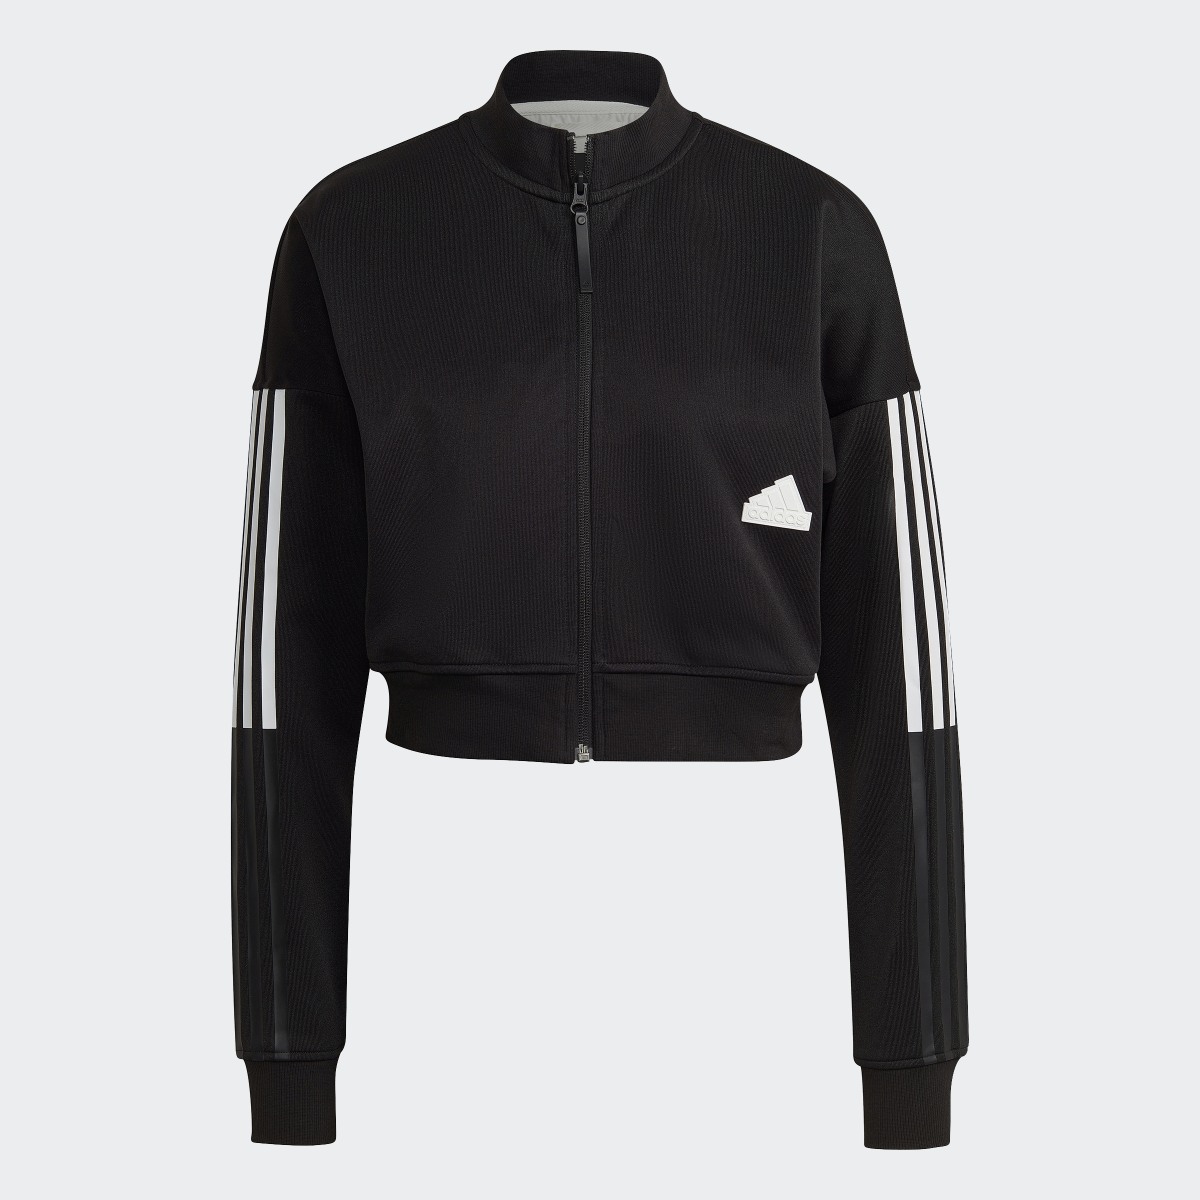 Adidas Cropped Track Top. 6